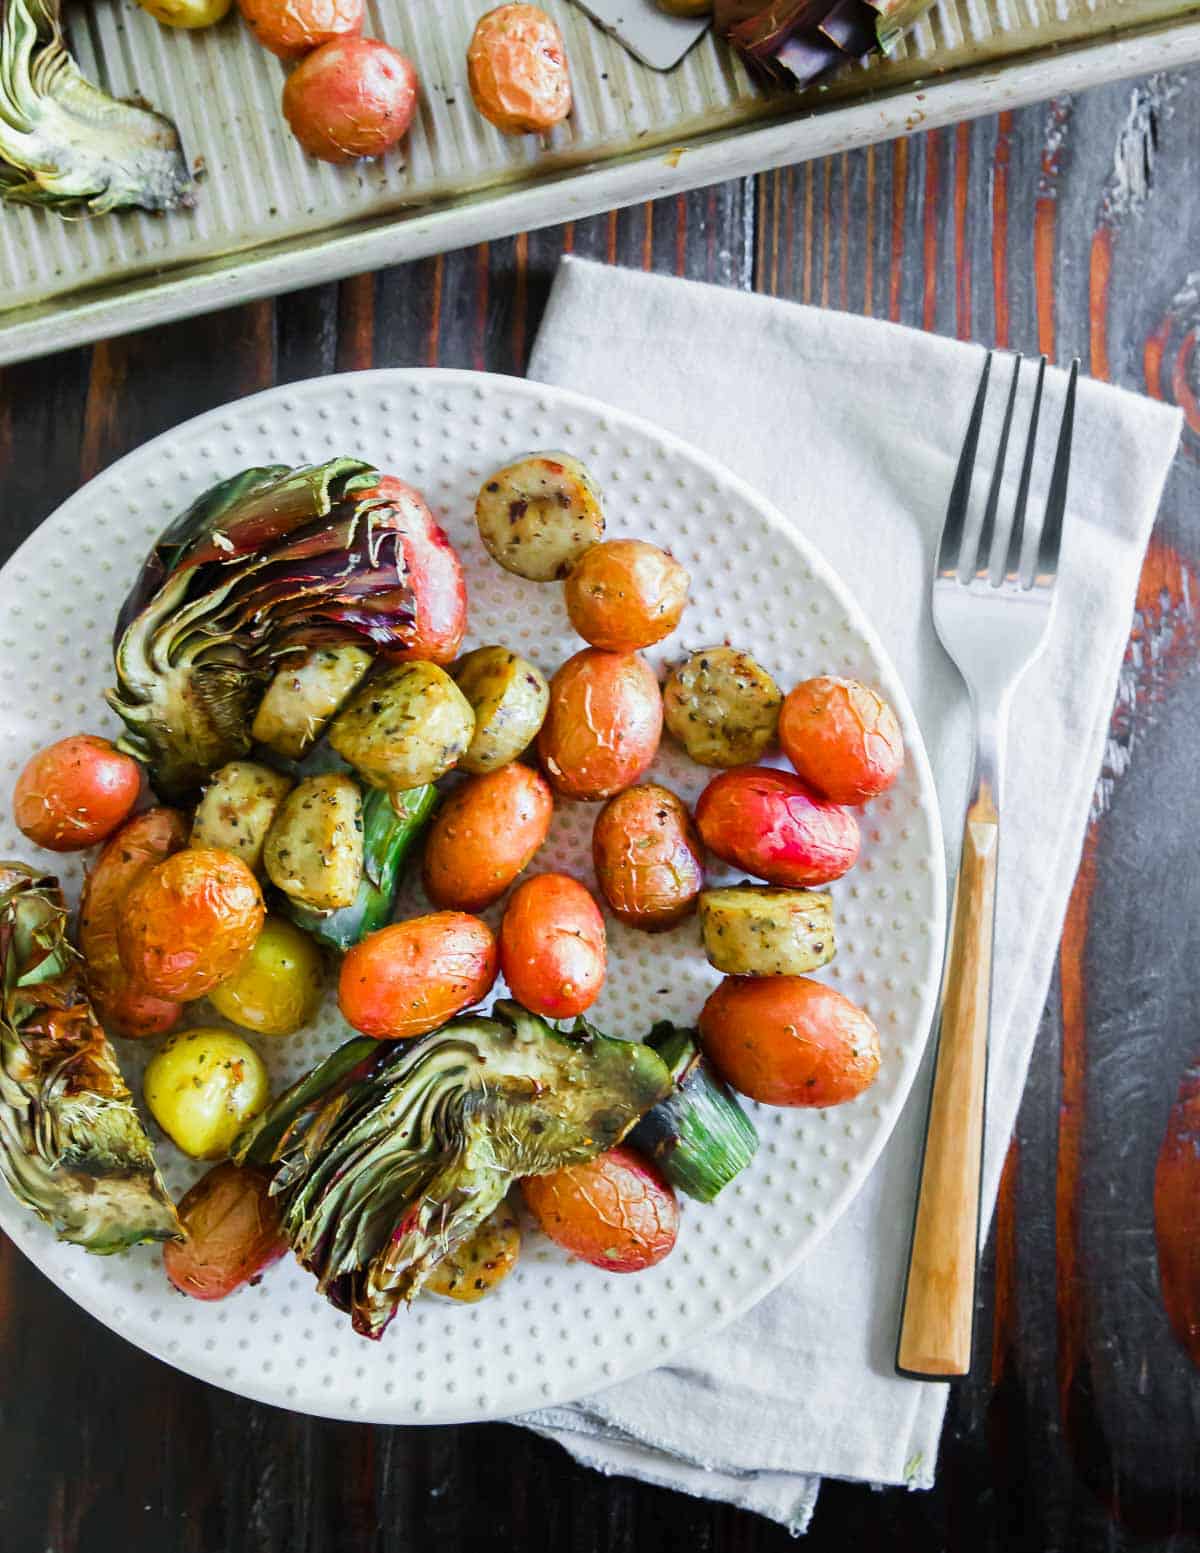 Roasted vegetables and potatoes on a plate with a fork.